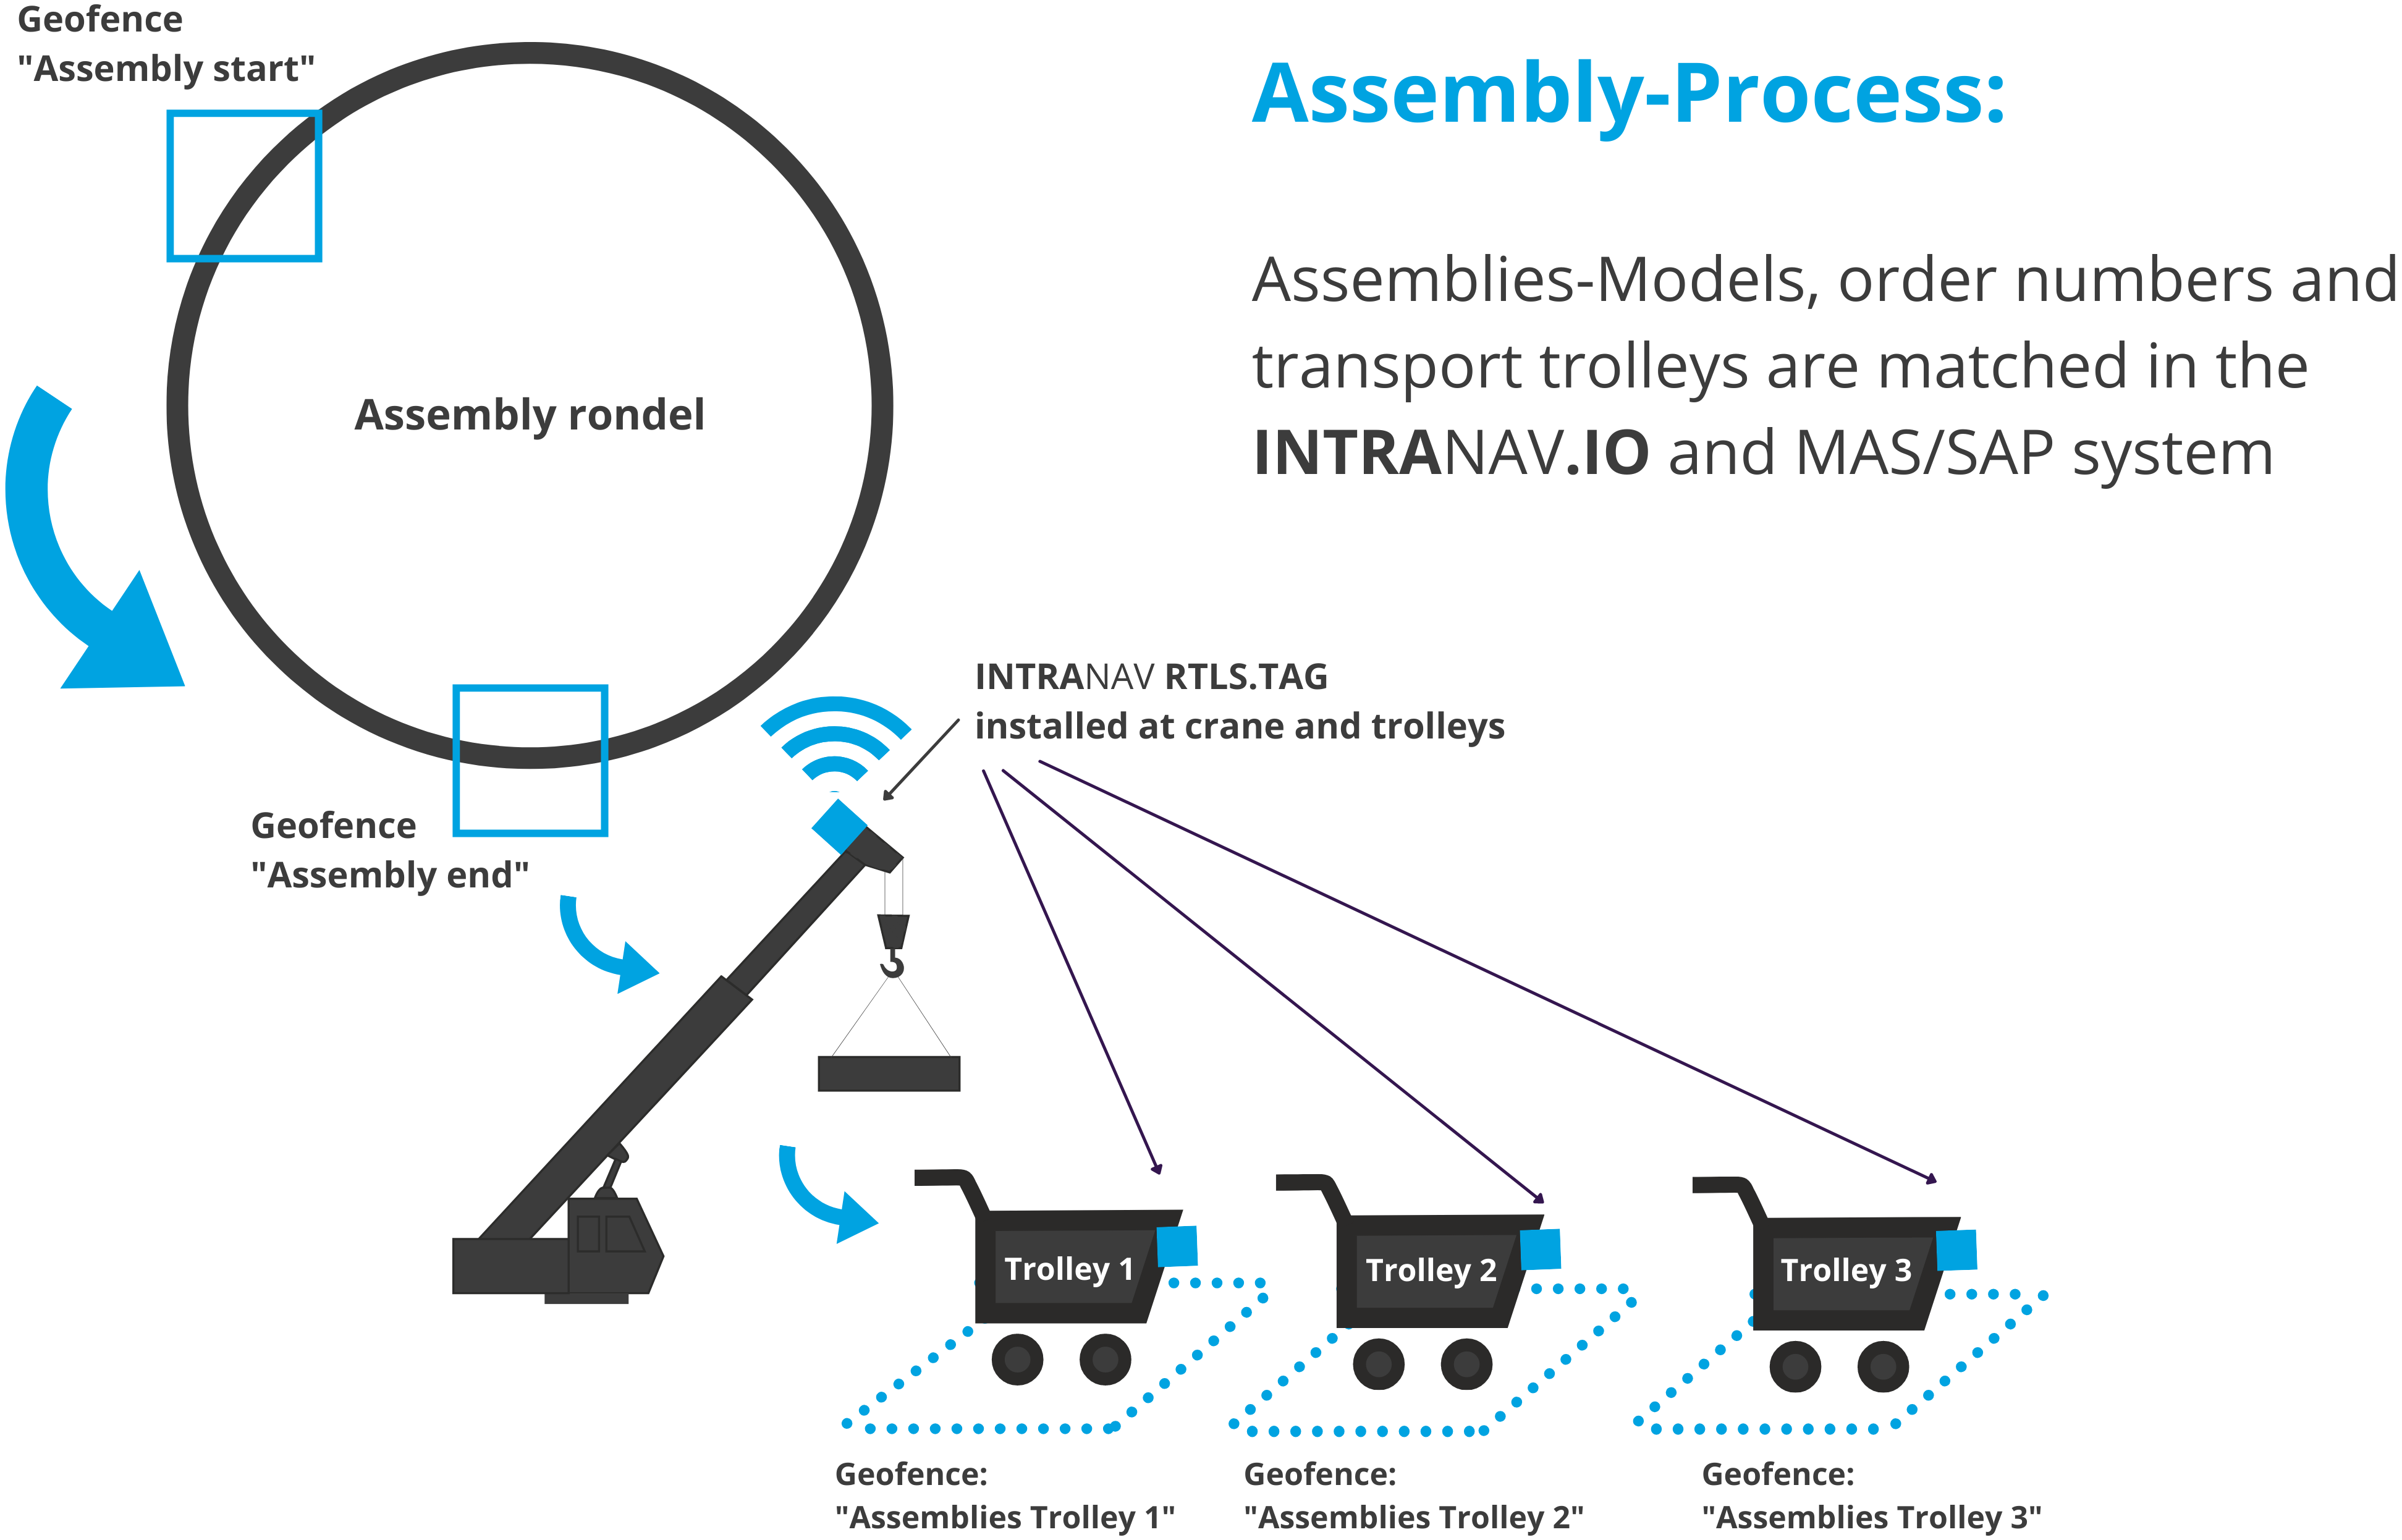 Assembly process: assemblies-models, order numbers, and transport trolleys are matched in the INTRANAV.IO and MAS/SAP system